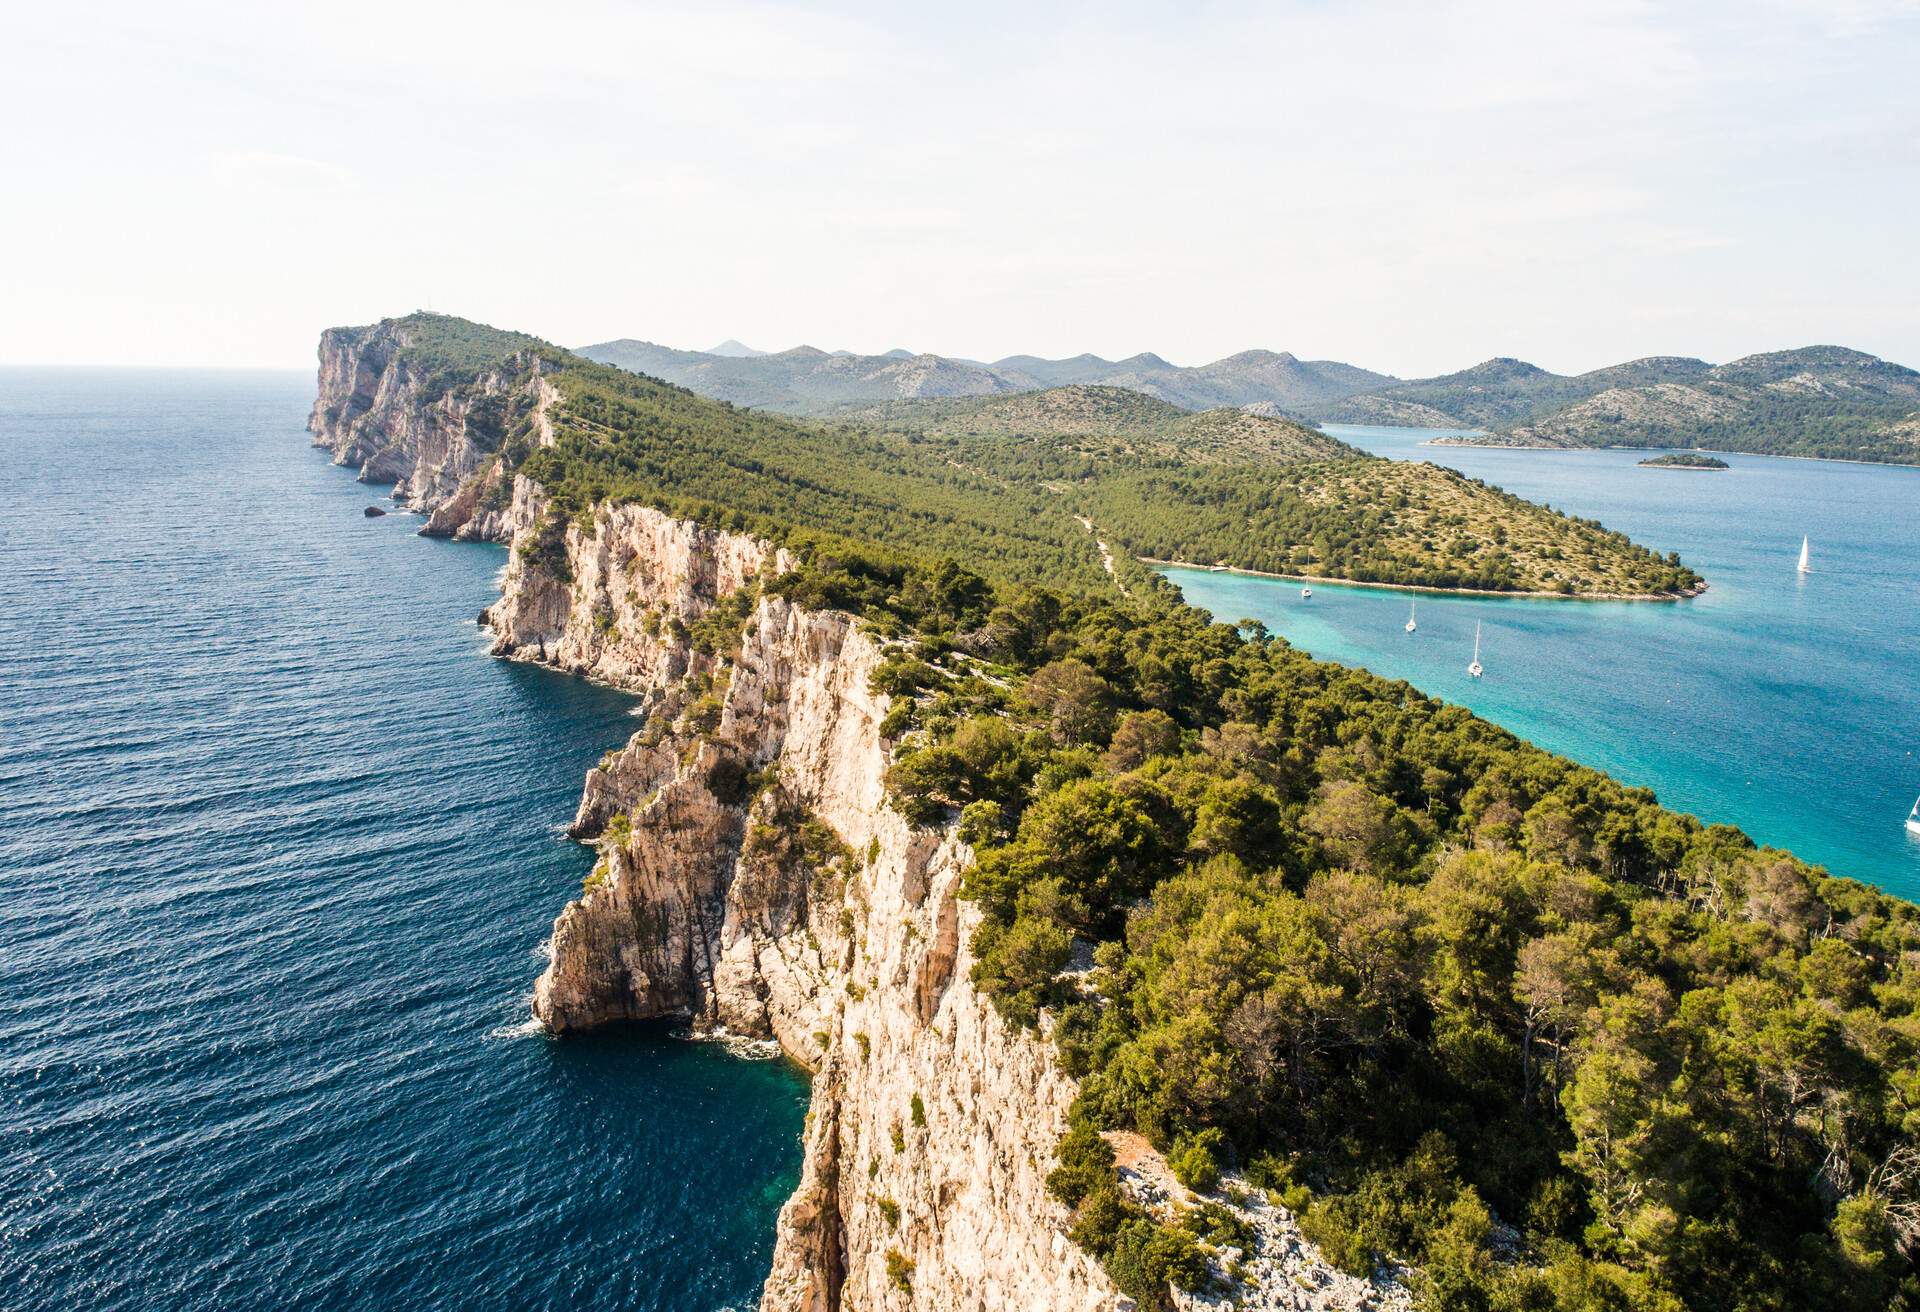 Seascape with picturesque islands and cliffs, Croatia